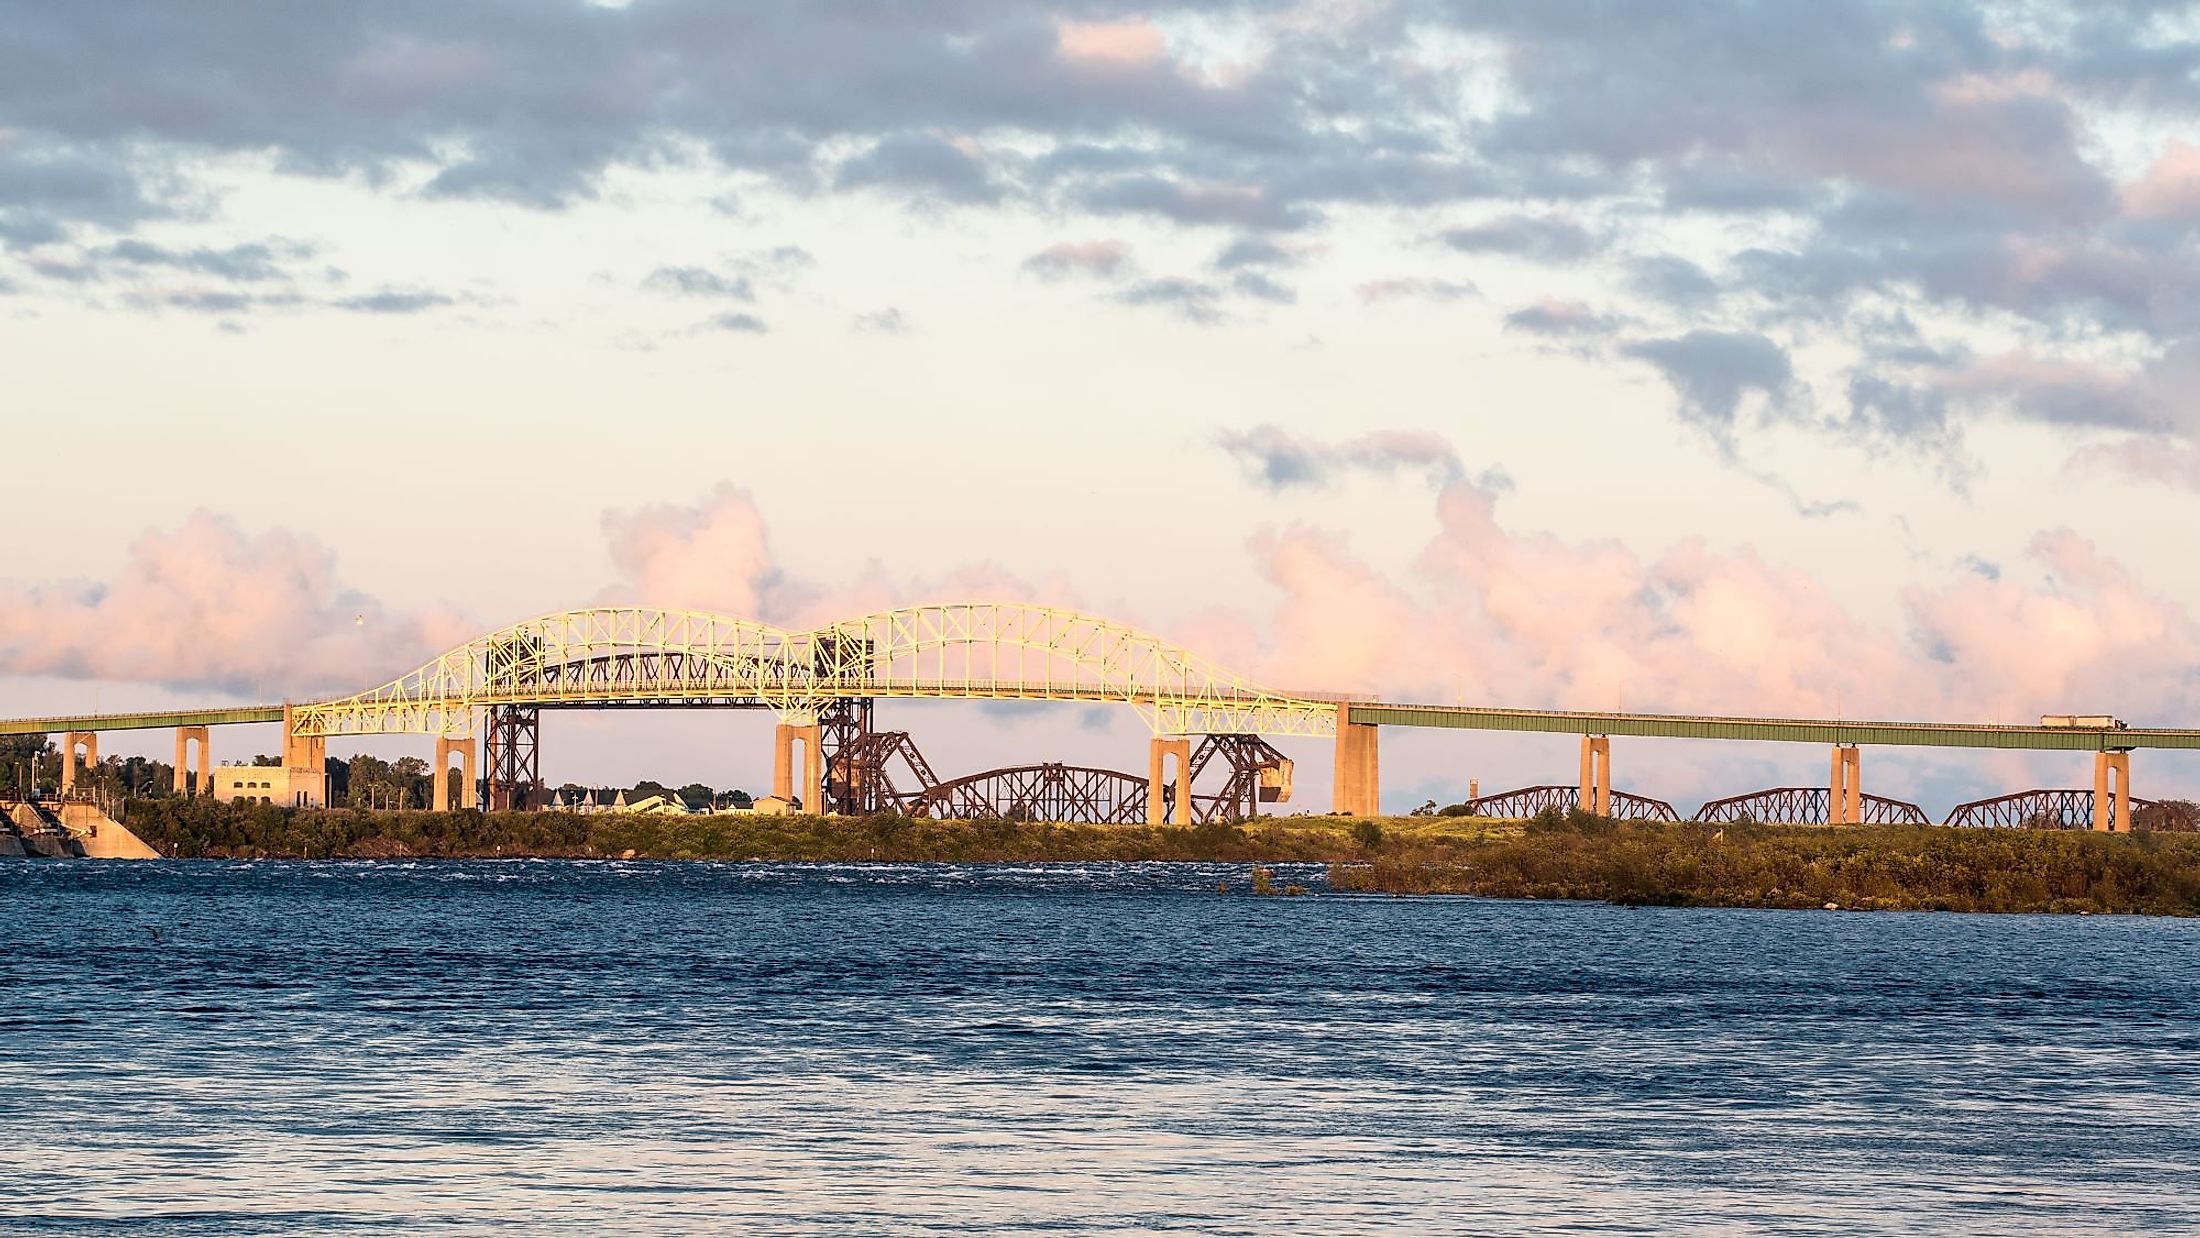 The Sault Ste. Marie International Bridge crosses the St. Marys River from Canada to US. 